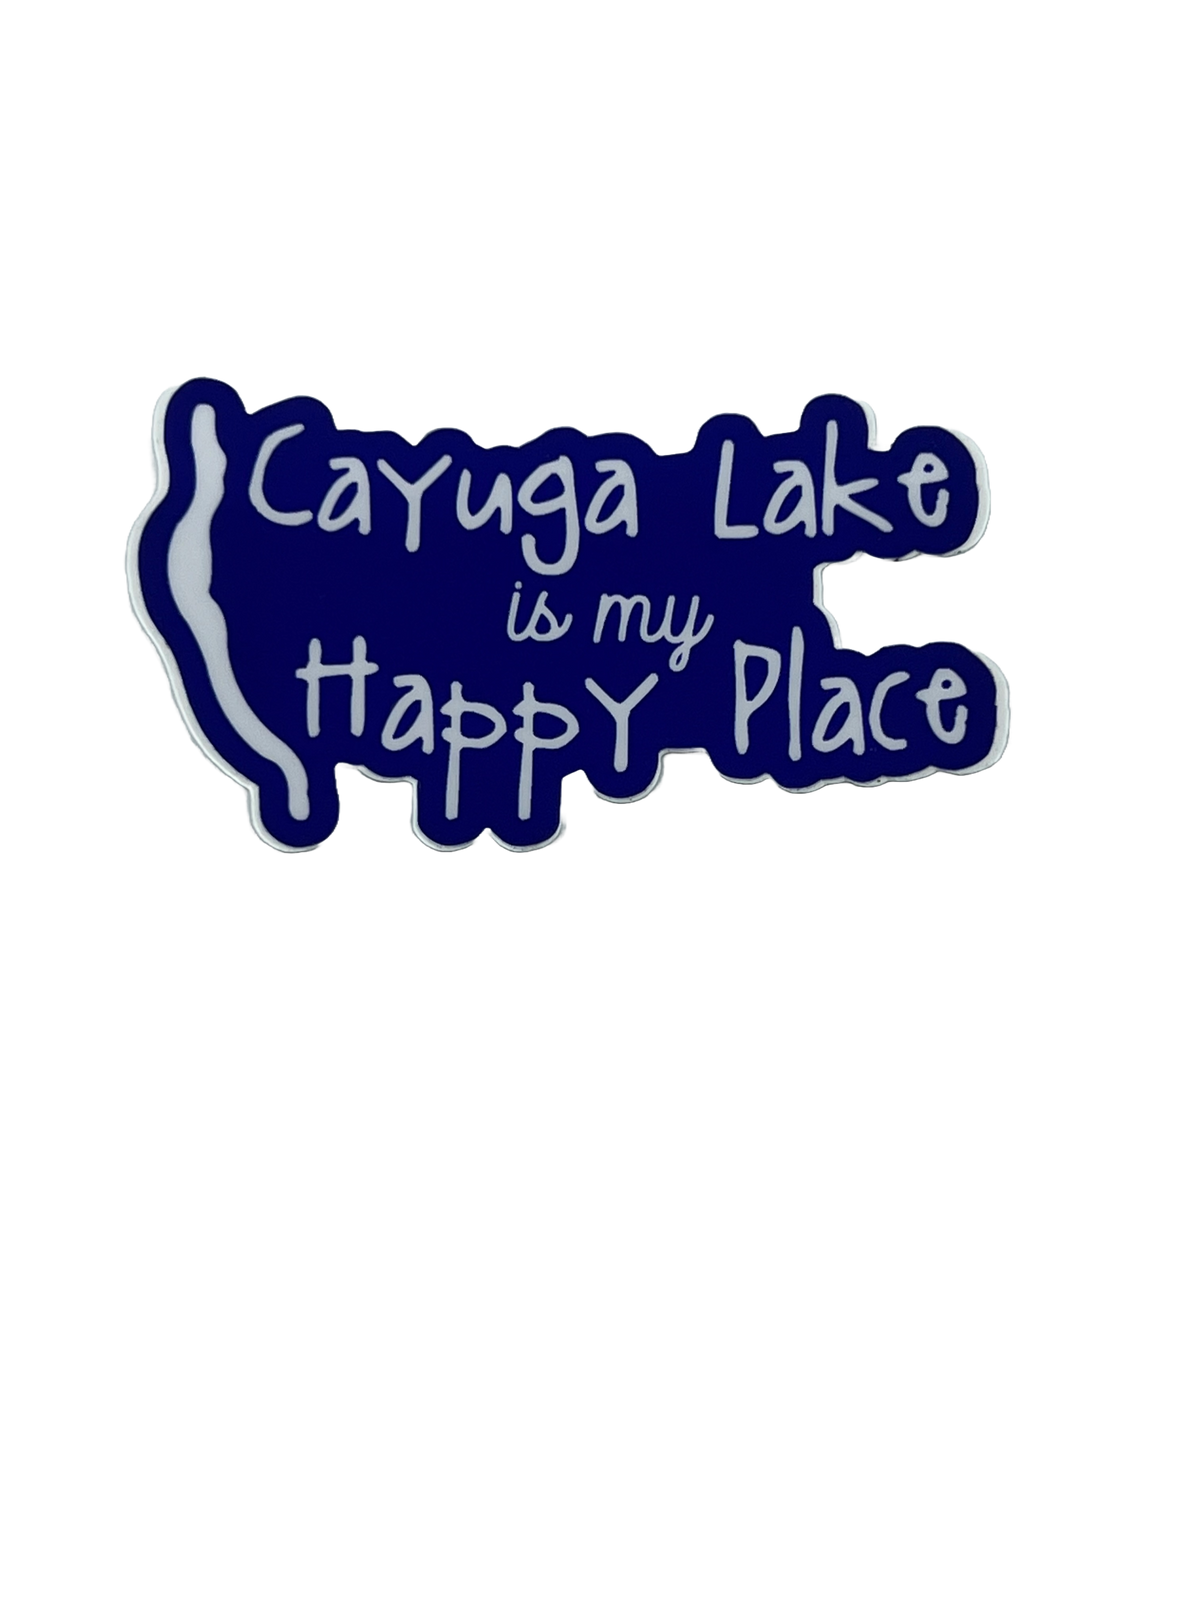 Cayuga Lake is my Happy Place Sticker